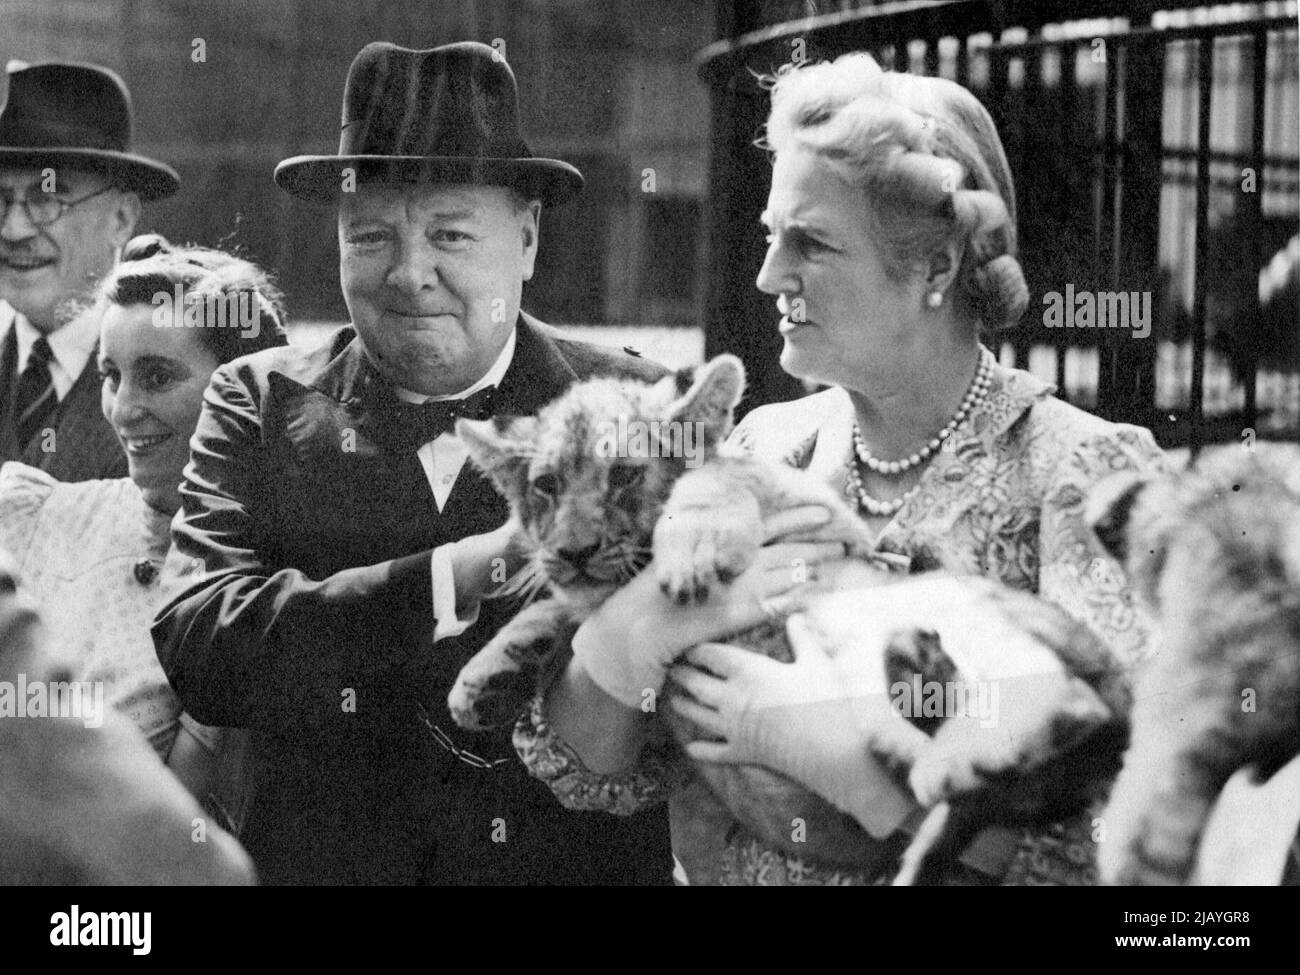 Mr. Churchill At The Zoo - Mrs. Churchill holds 'Tunis' while Mr. Churchill looks on. Mr. Winston Churchill accompanied by Mrs. Churchill paid a surprise visit to the Zoo to-day to see his lions and cubs. The holiday crowds gave them a tremendous welcome. July 26, 1943. (Photo by Topical Press). Stock Photo